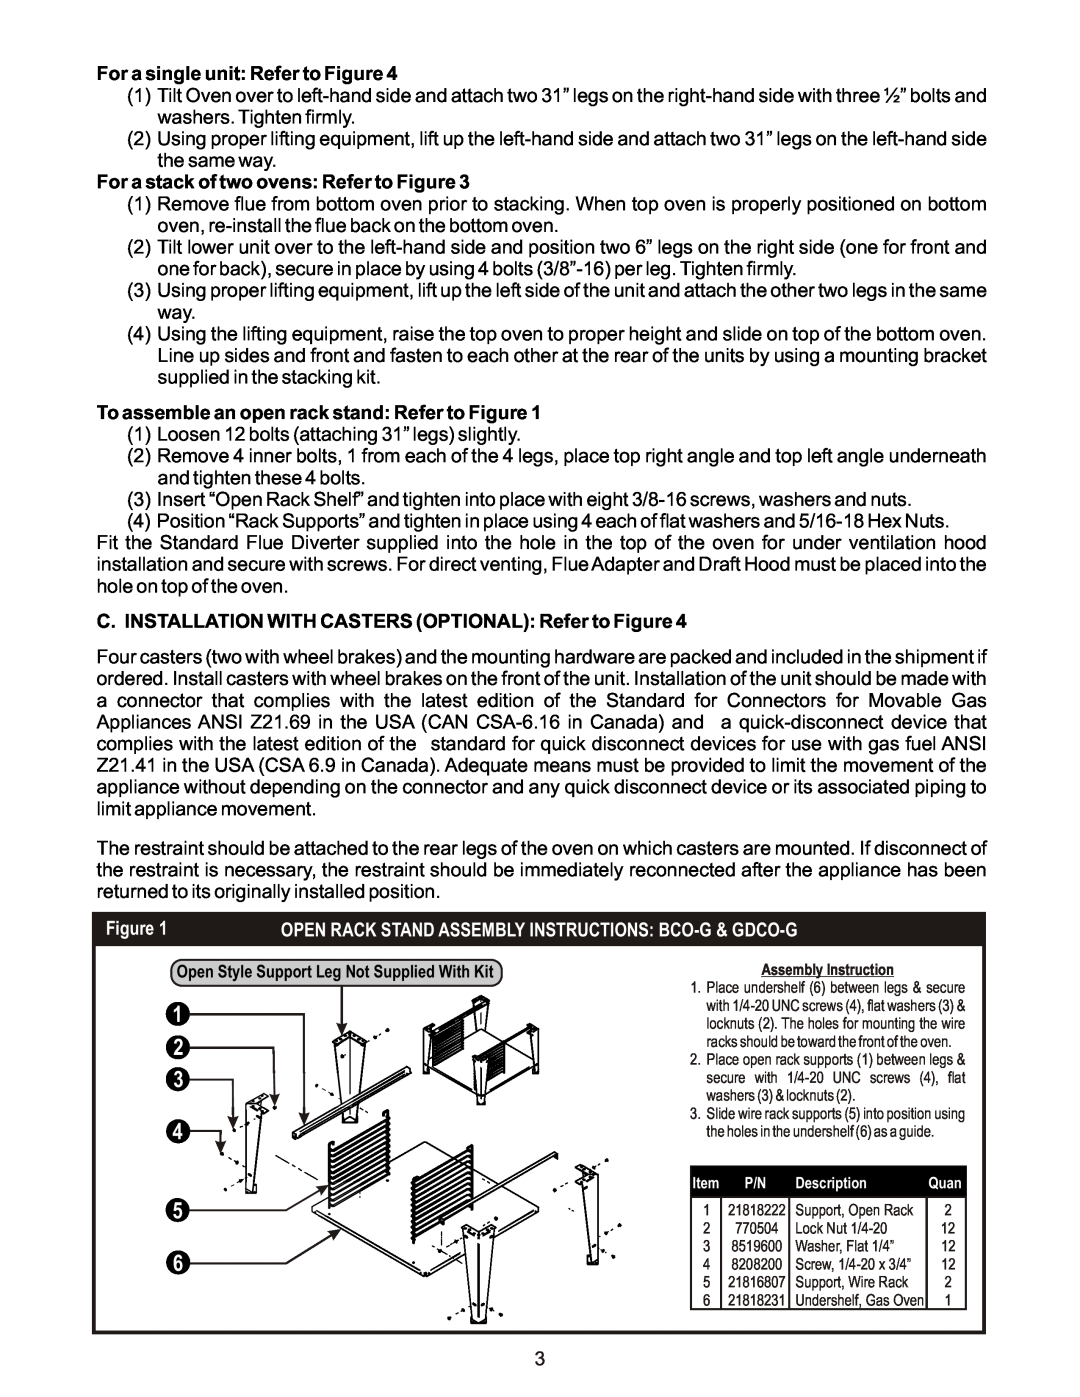 Bakers Pride Oven GDCO-G, BCO-G manual For a single unit Refer to Figure, For a stack of two ovens Refer to Figure 